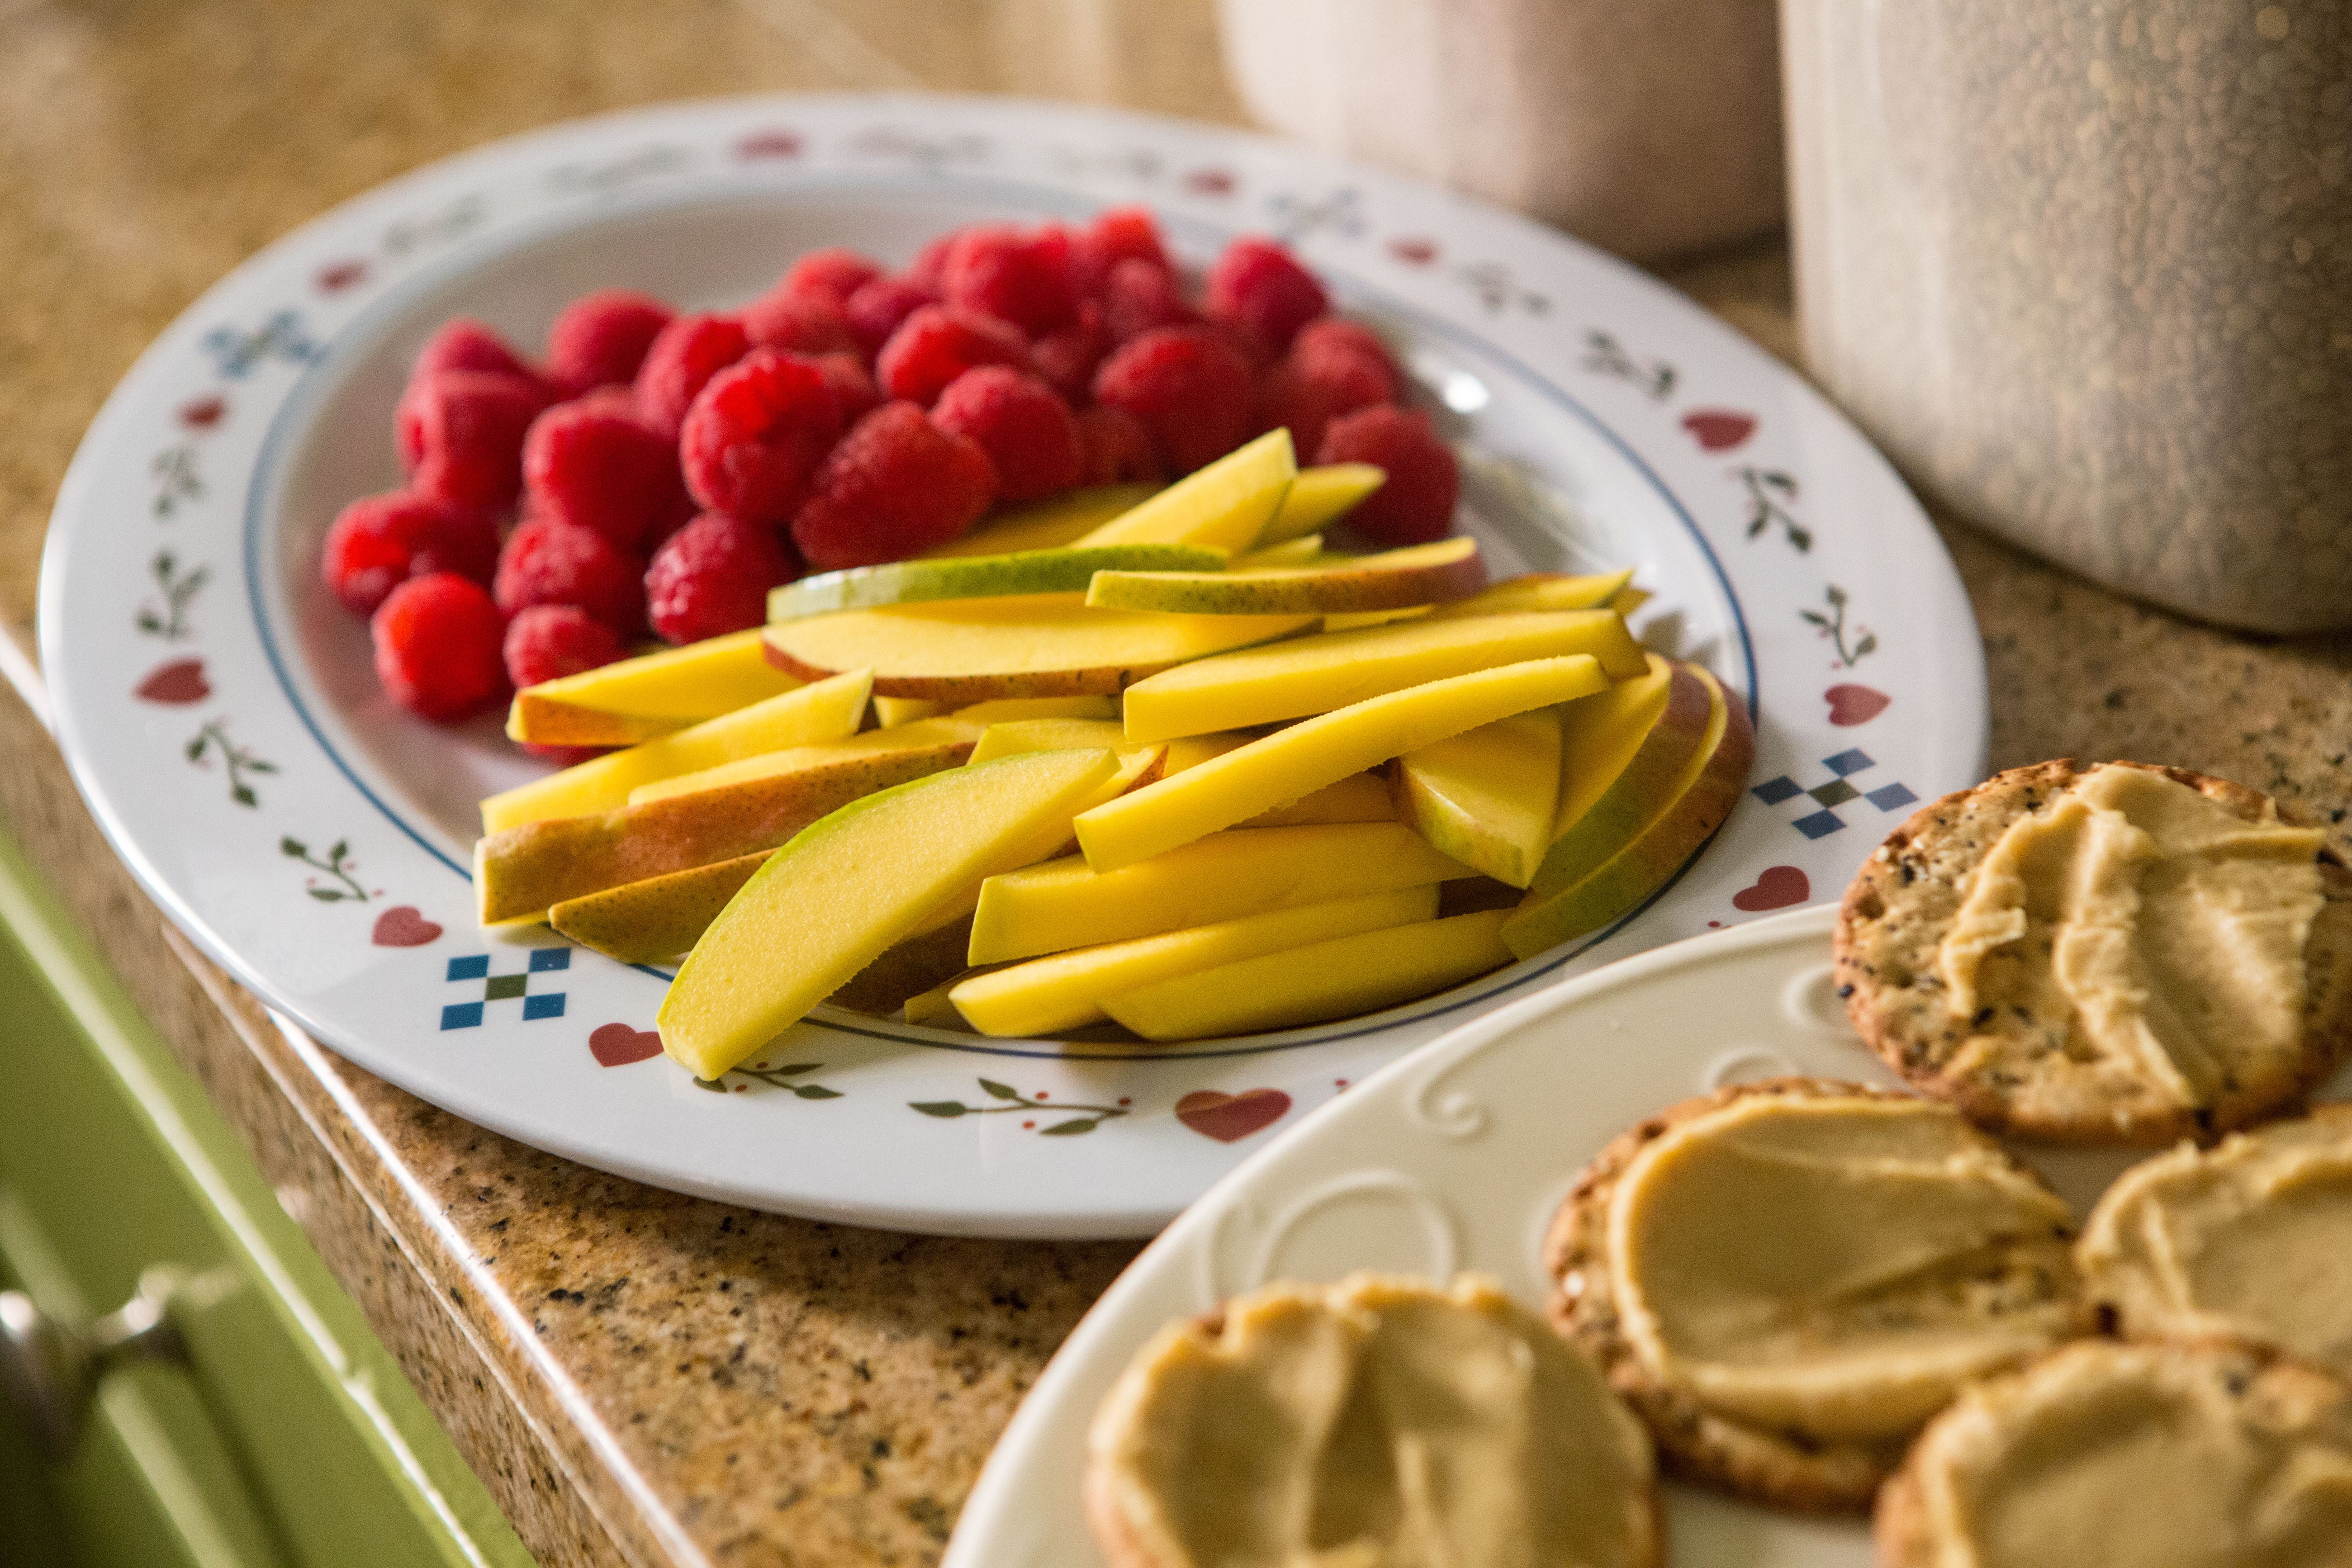 Hummus on multi-grain crackers and fresh mango and raspberries are prepared for snack at Shining Stars Family Child Care.